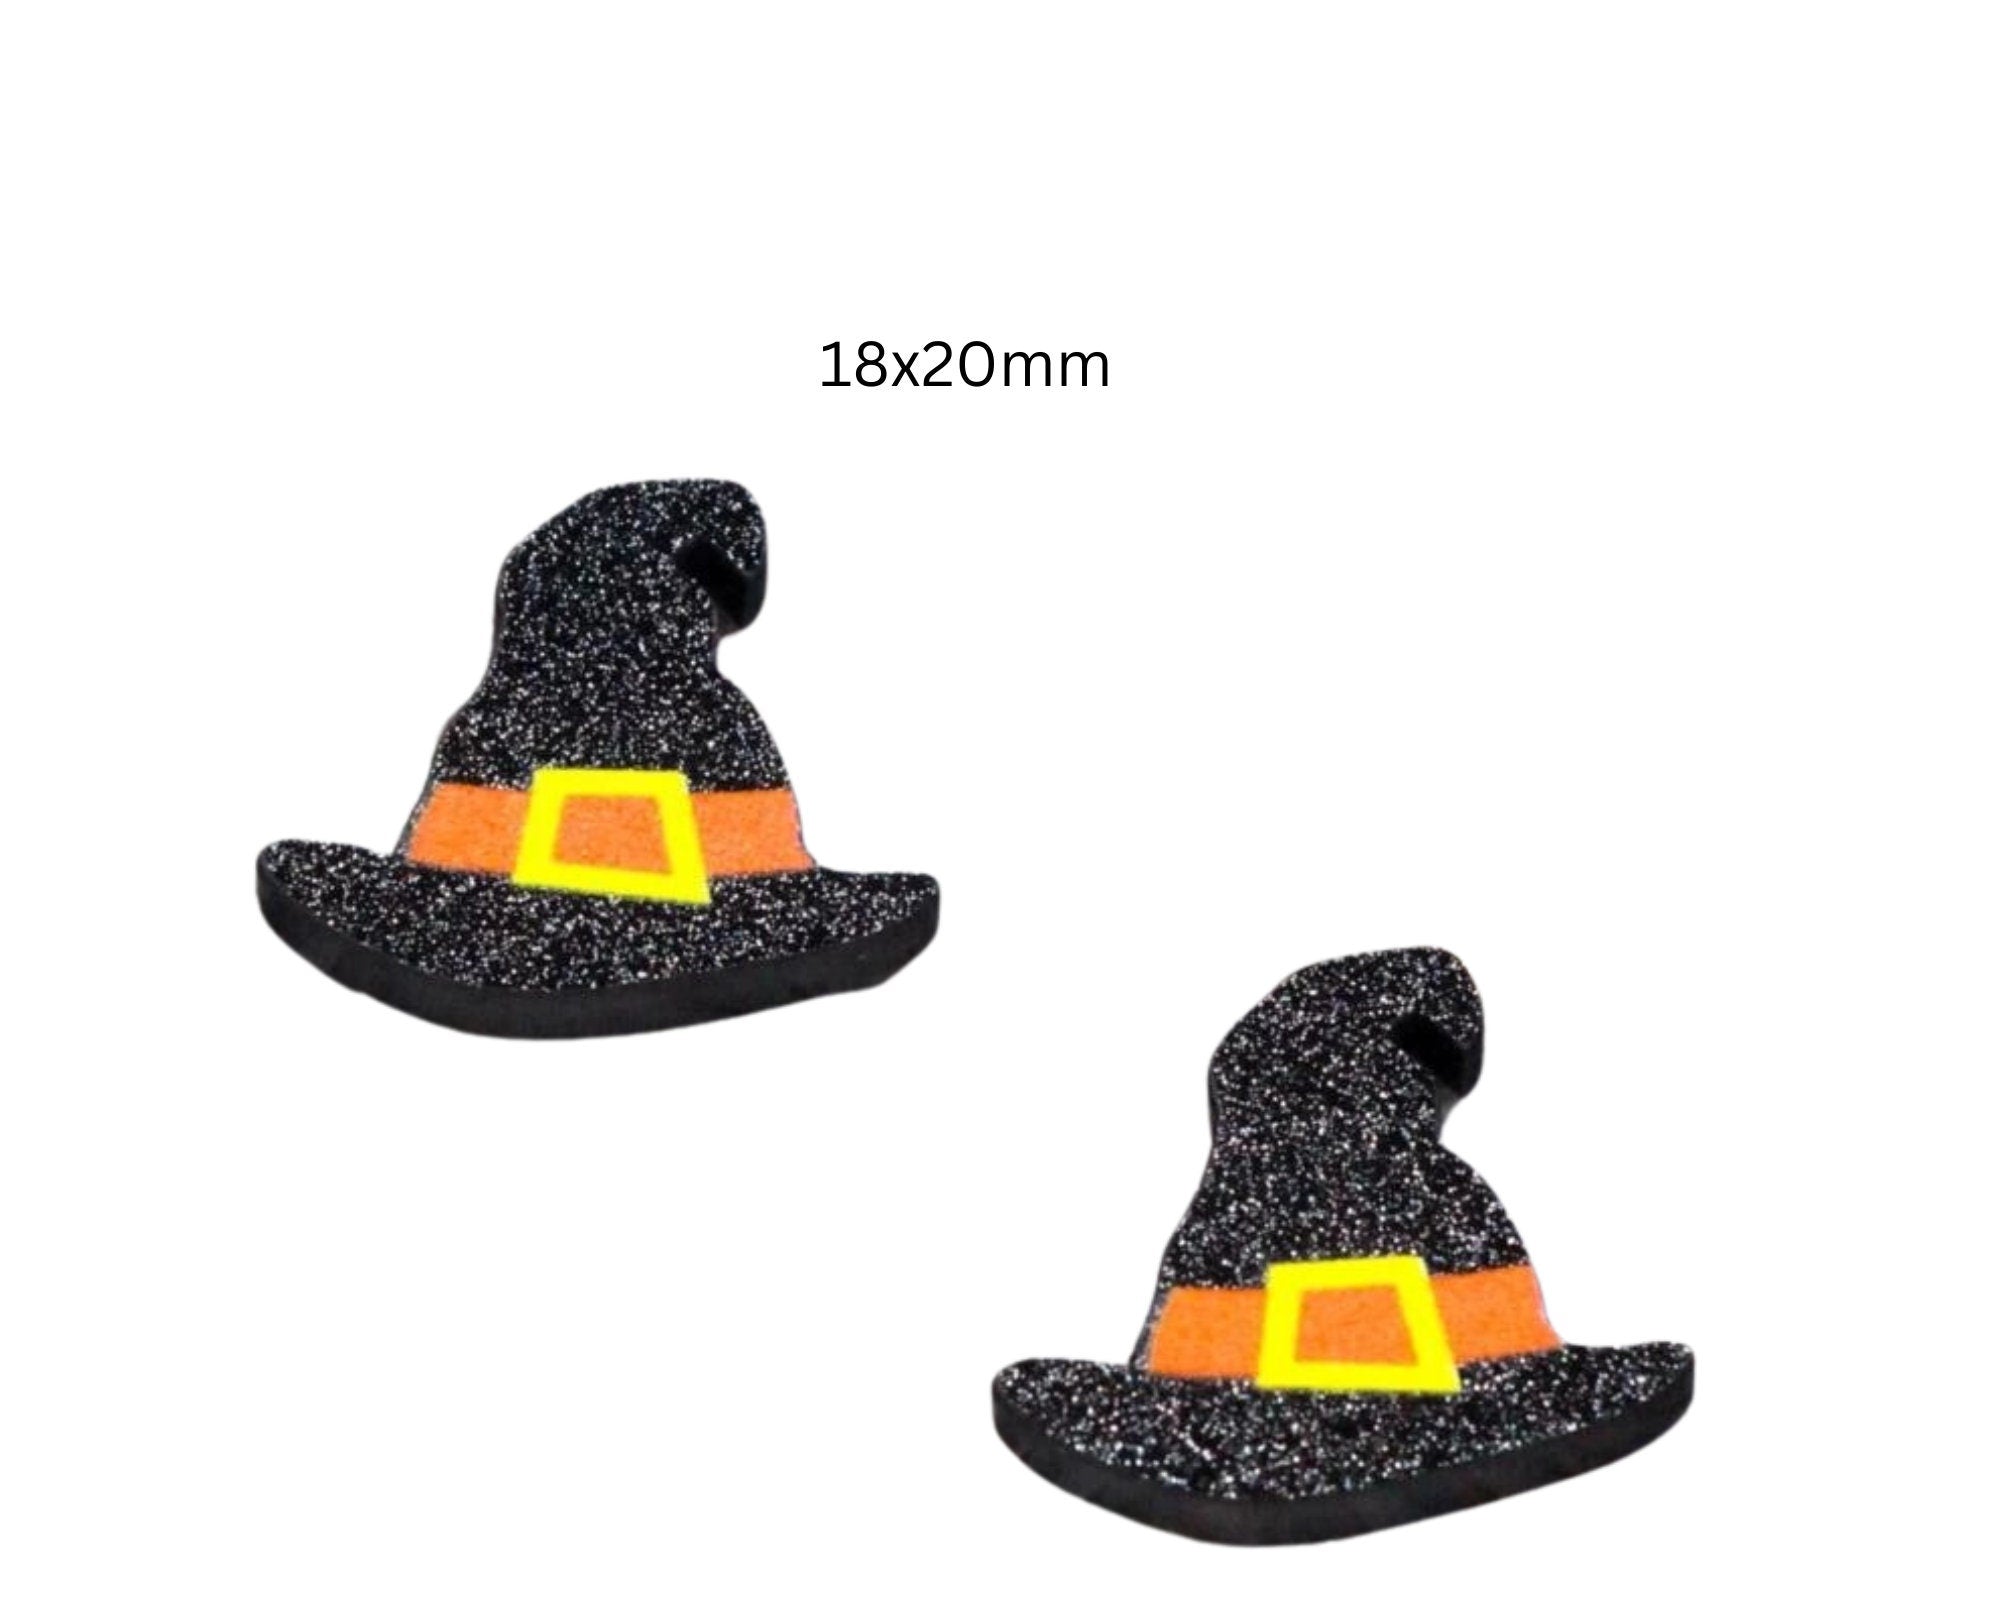 10pcs (5prs) 18mm halloween cabochon, Laser cut acrylic, witches hat glitter Earring (No Stud), witch Earrings, flatback, halloween earrings